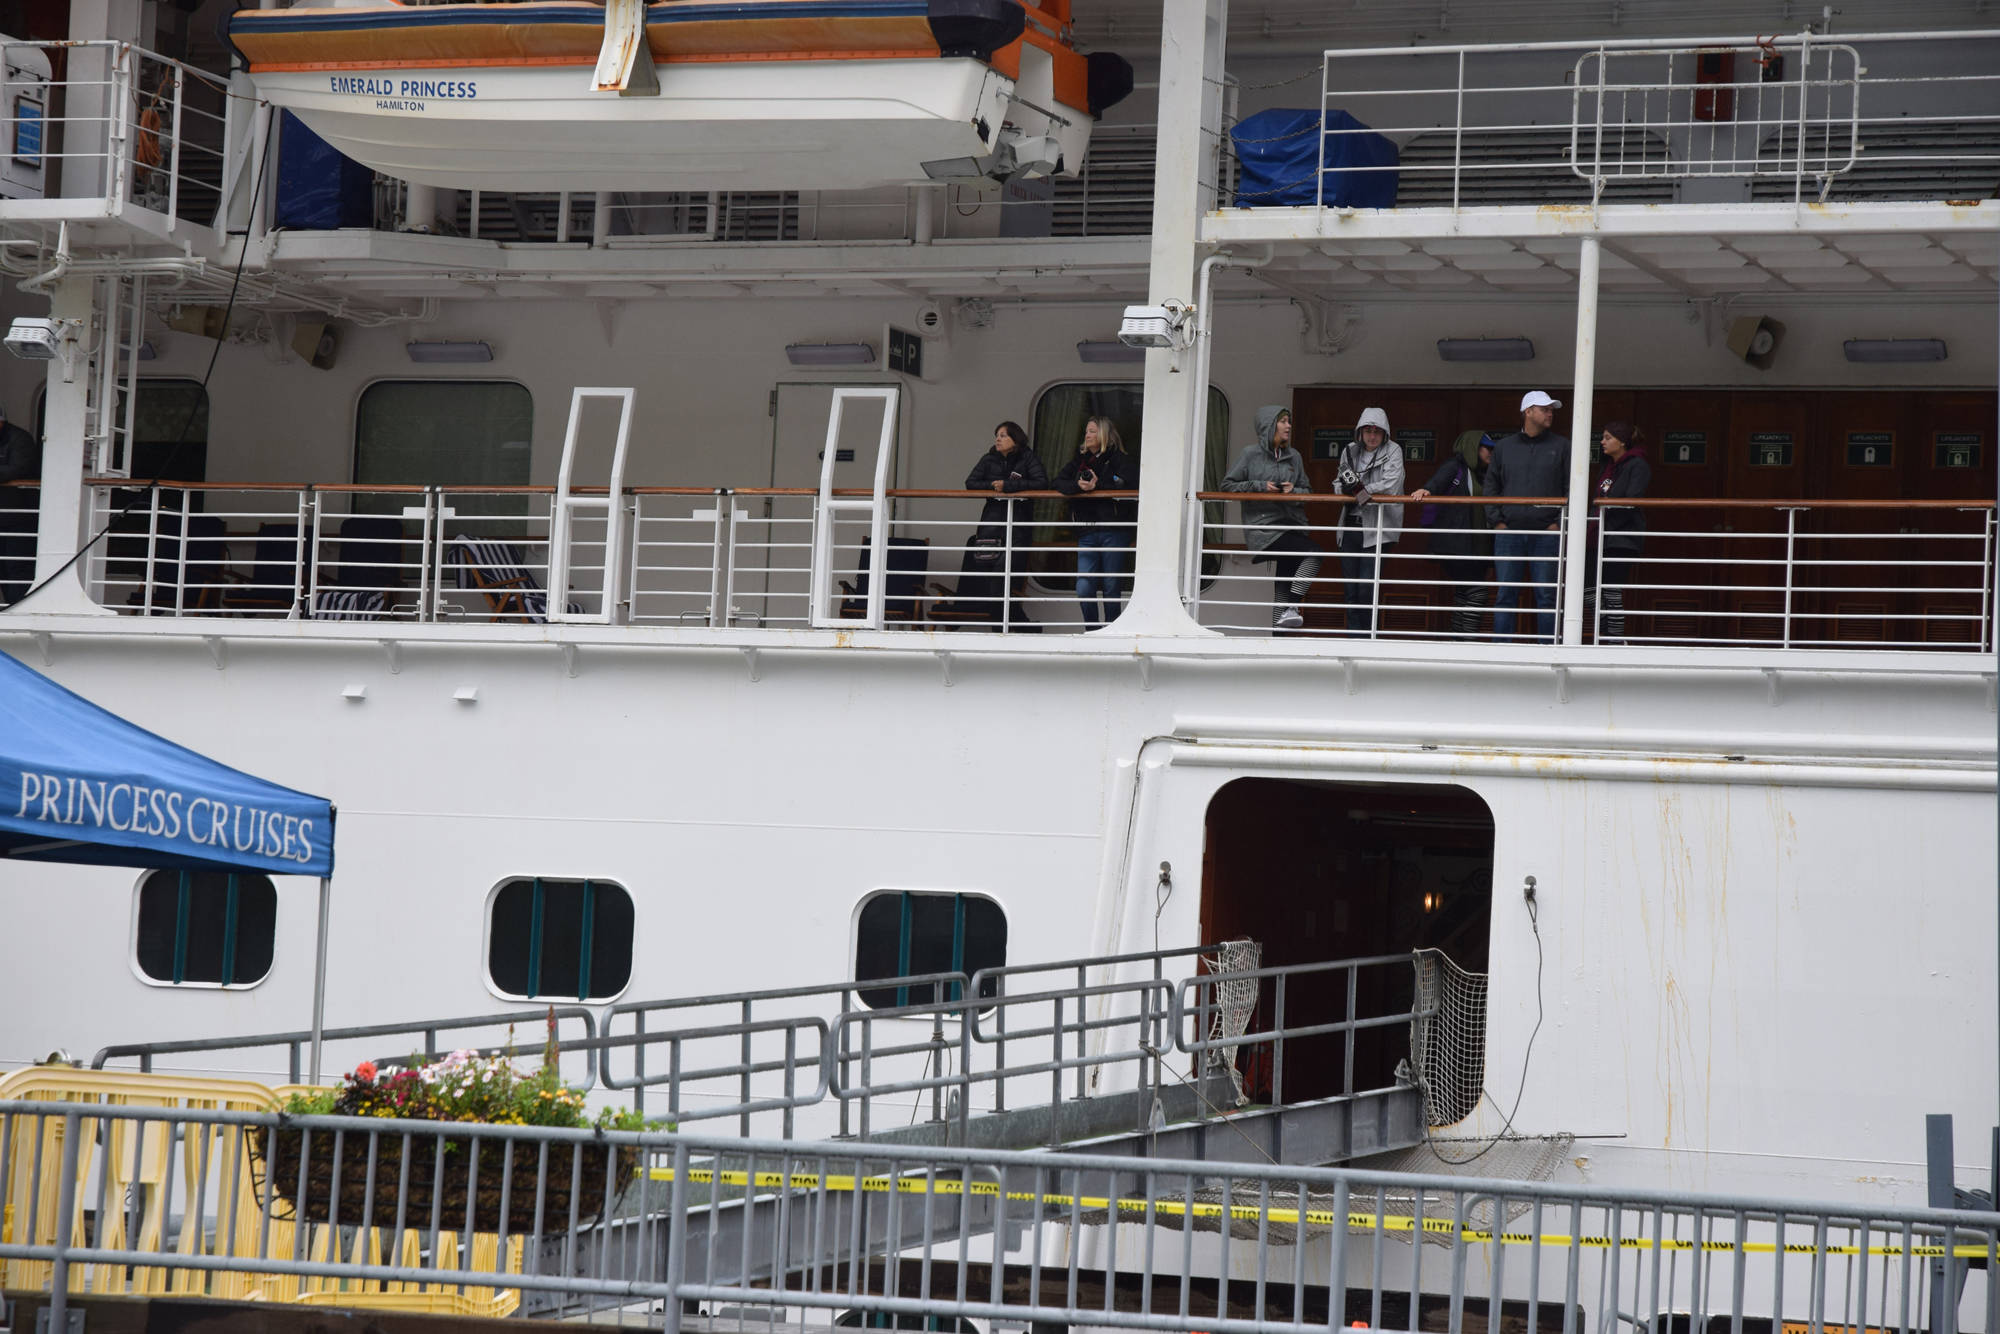 Police tape surrounds an entrance to the Emerald Princess as passengers wait for an announcement allowing them to disembark Wednesday in Juneau. (Liz Kellar | Juneau Empire)